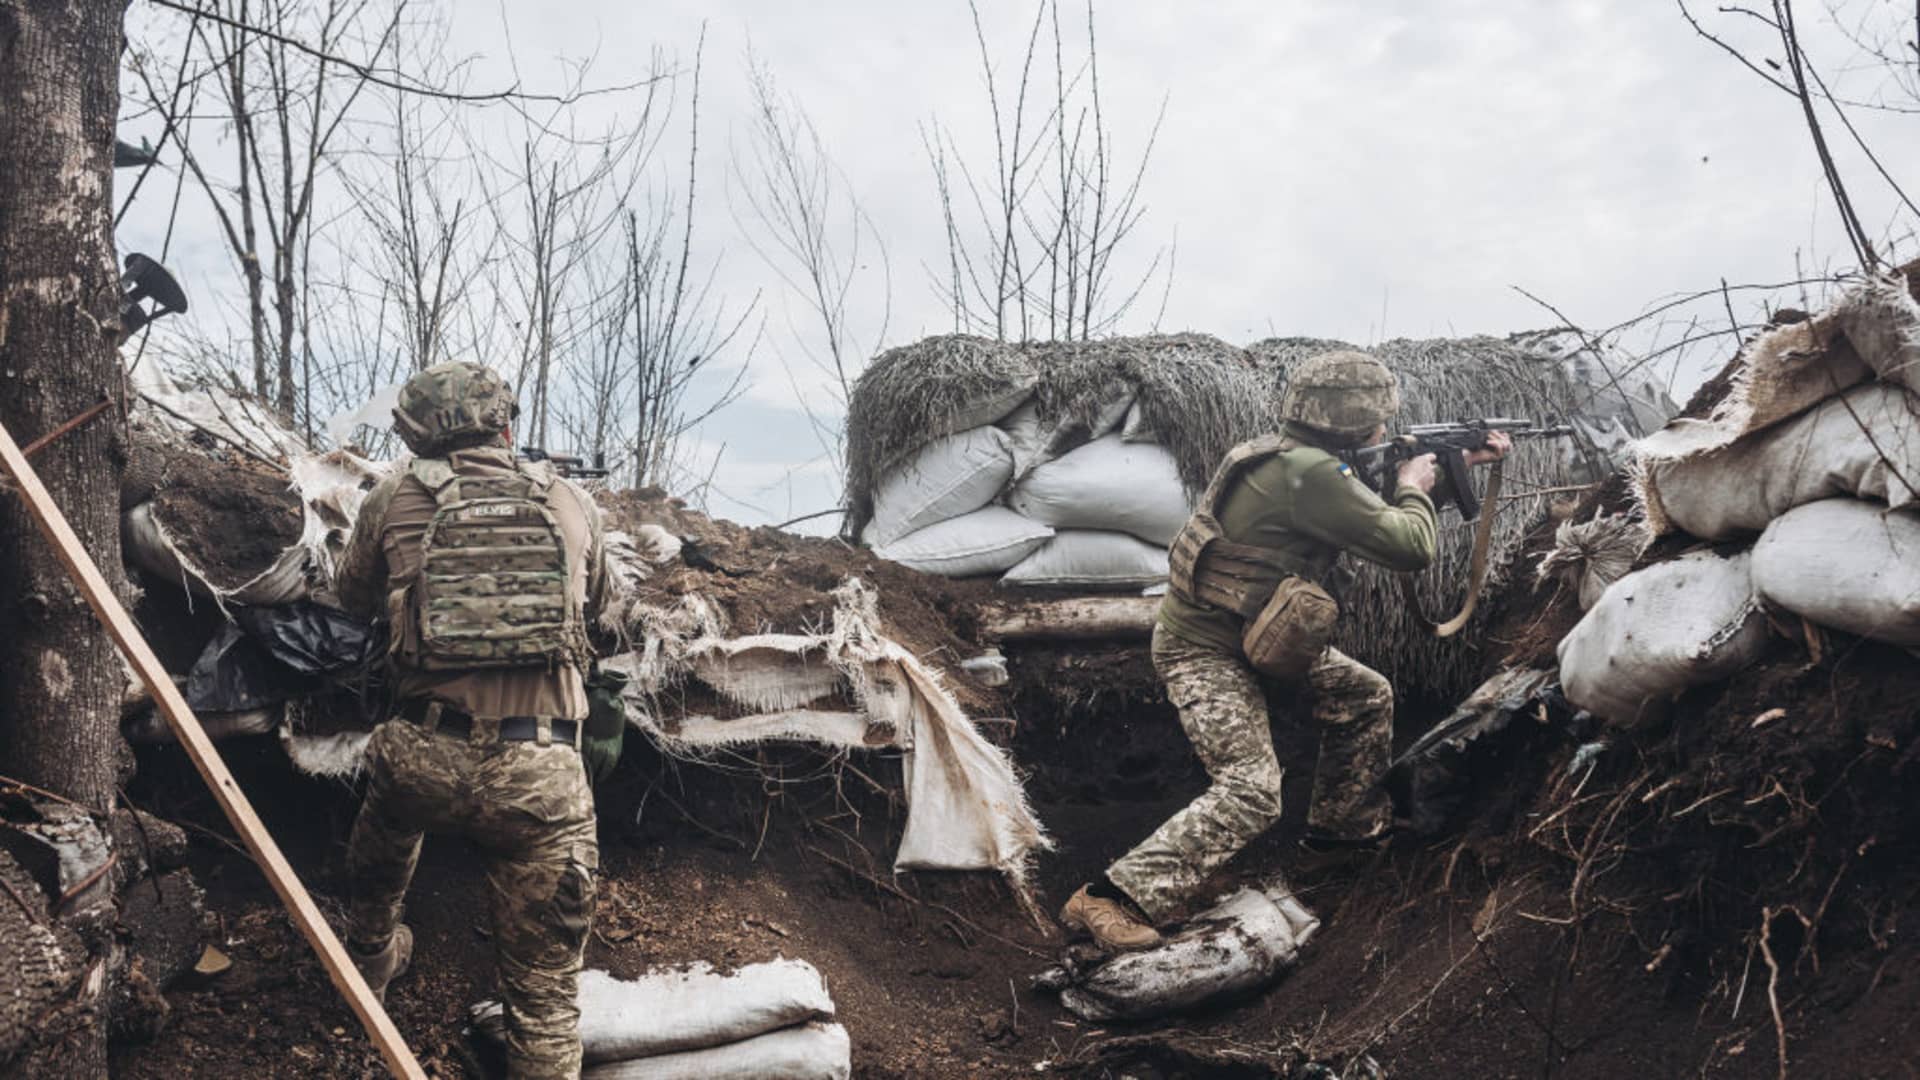 Ukrainian soldiers take aim from their frontline position in eastern Ukraine, on April 11, 2022. British Defence authorities predict fighting will worsen there over the next two to three weeks.